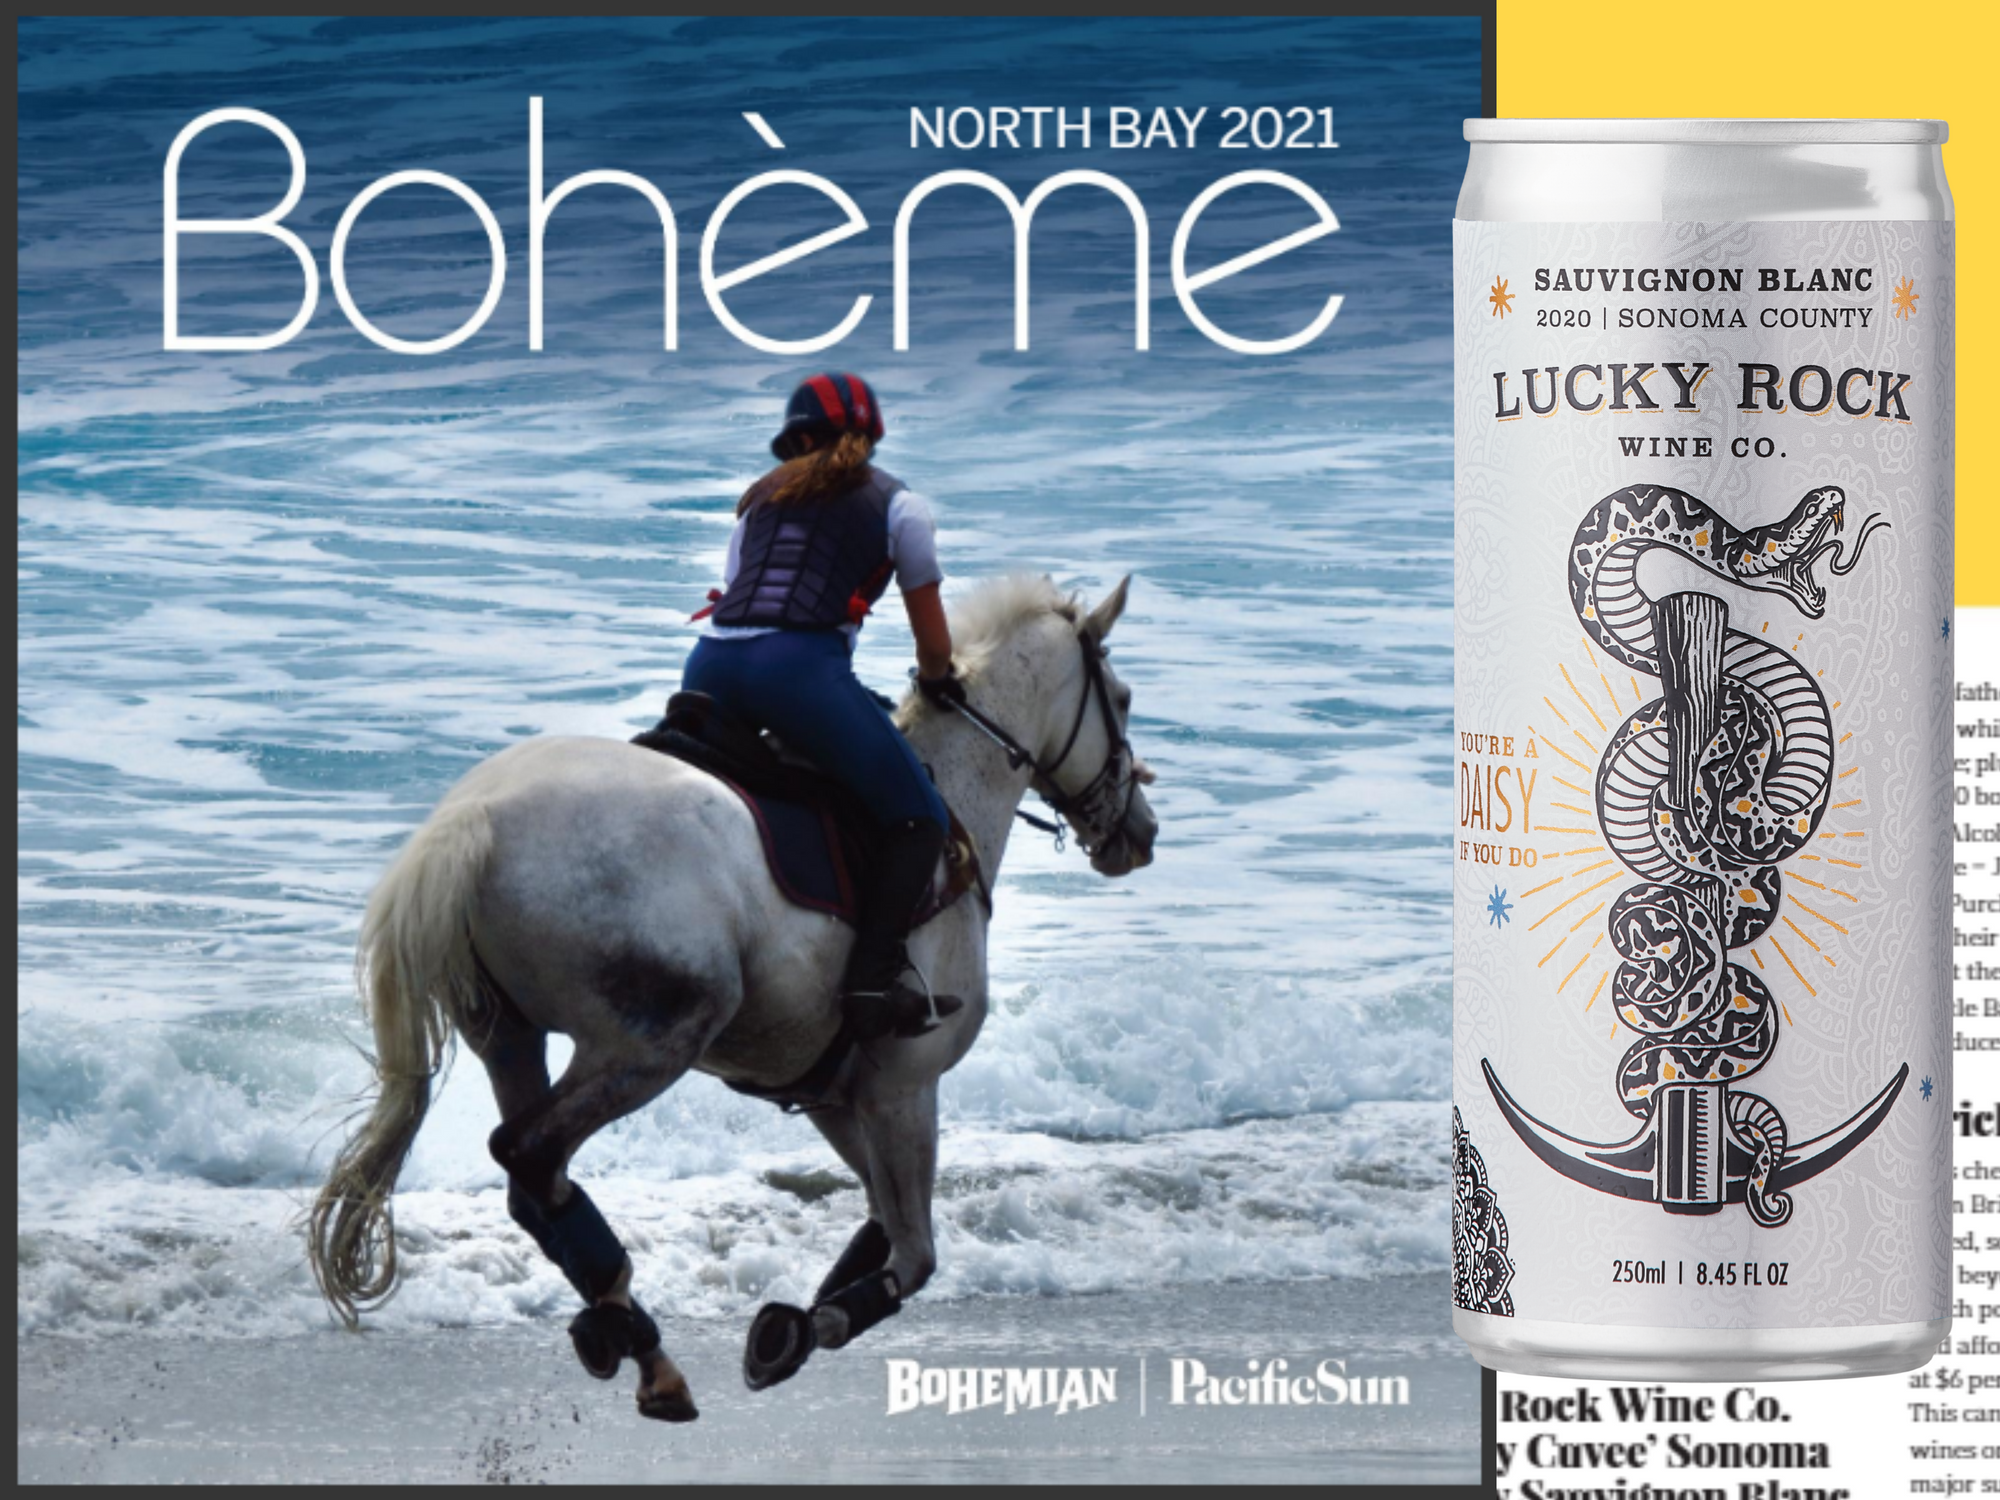 Lucky Rock Sauv Blanc Featured in Boheme North Bay!